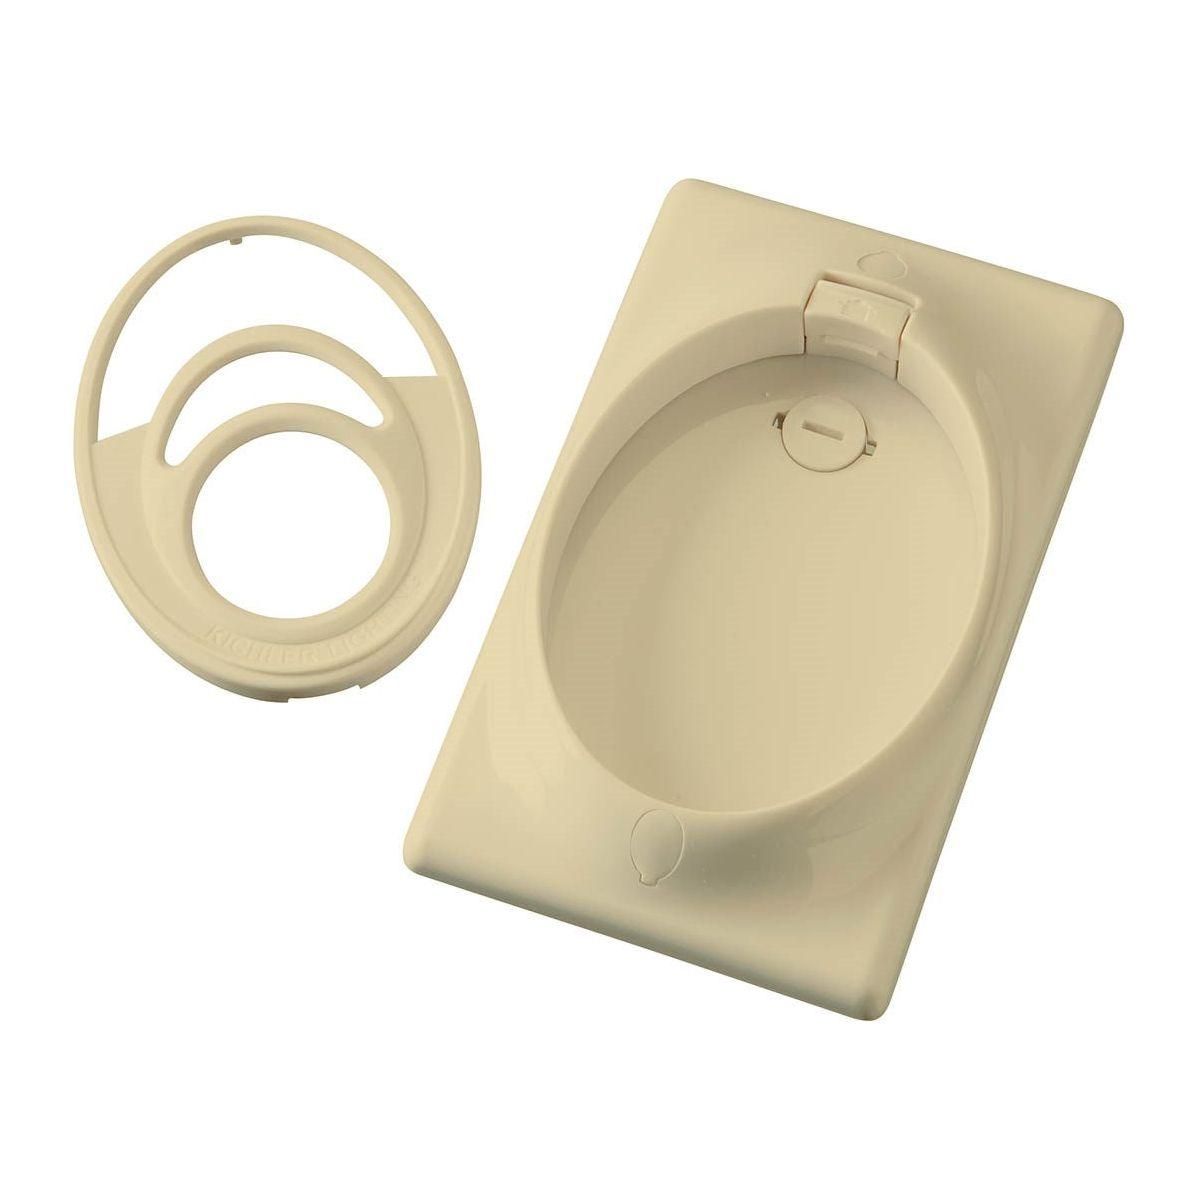 Kichler - CoolTouch Single Gang Wall Plate - Lights Canada